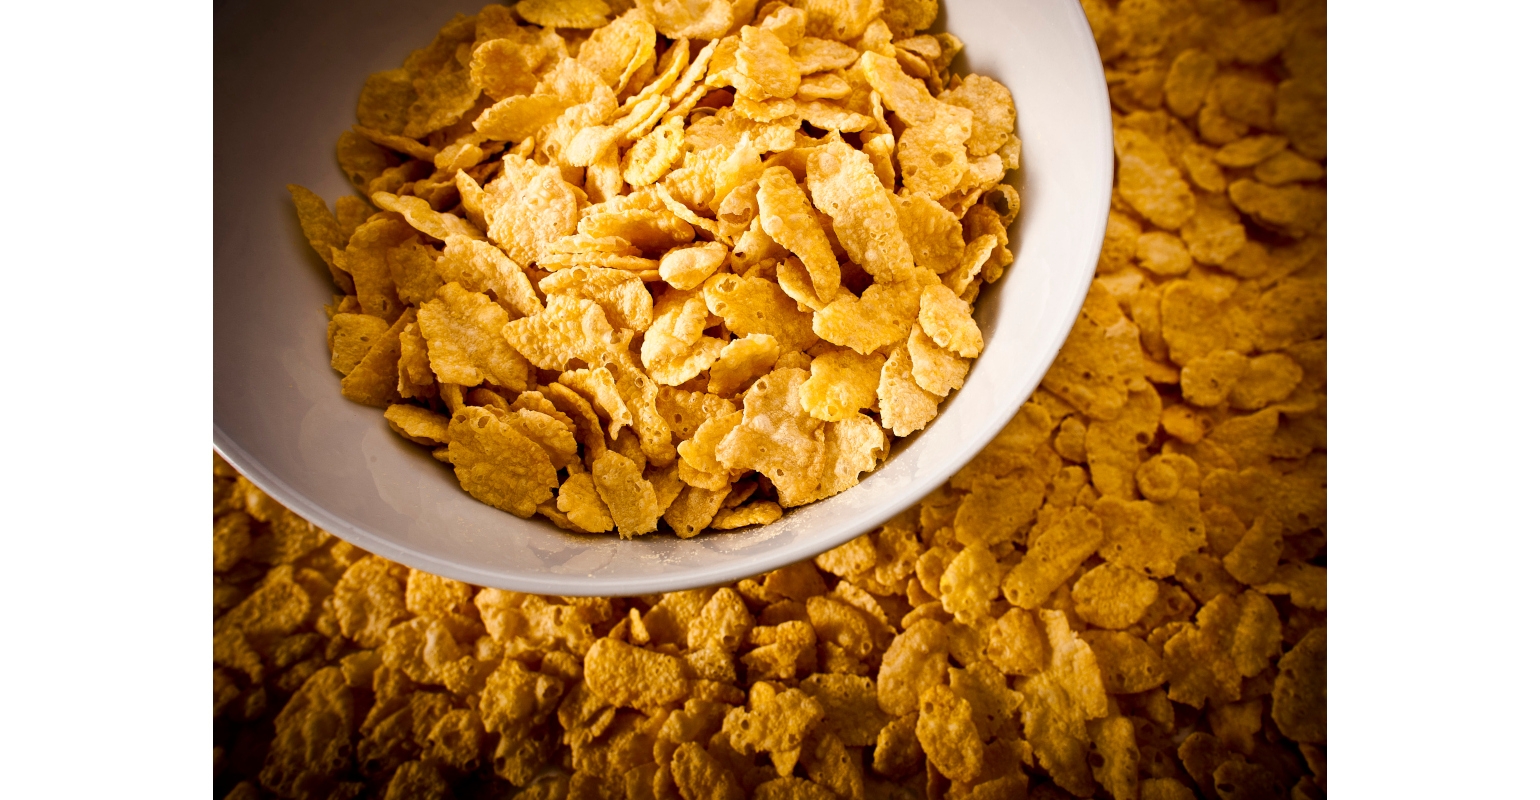 Kellogg's global cereal business gains momentum